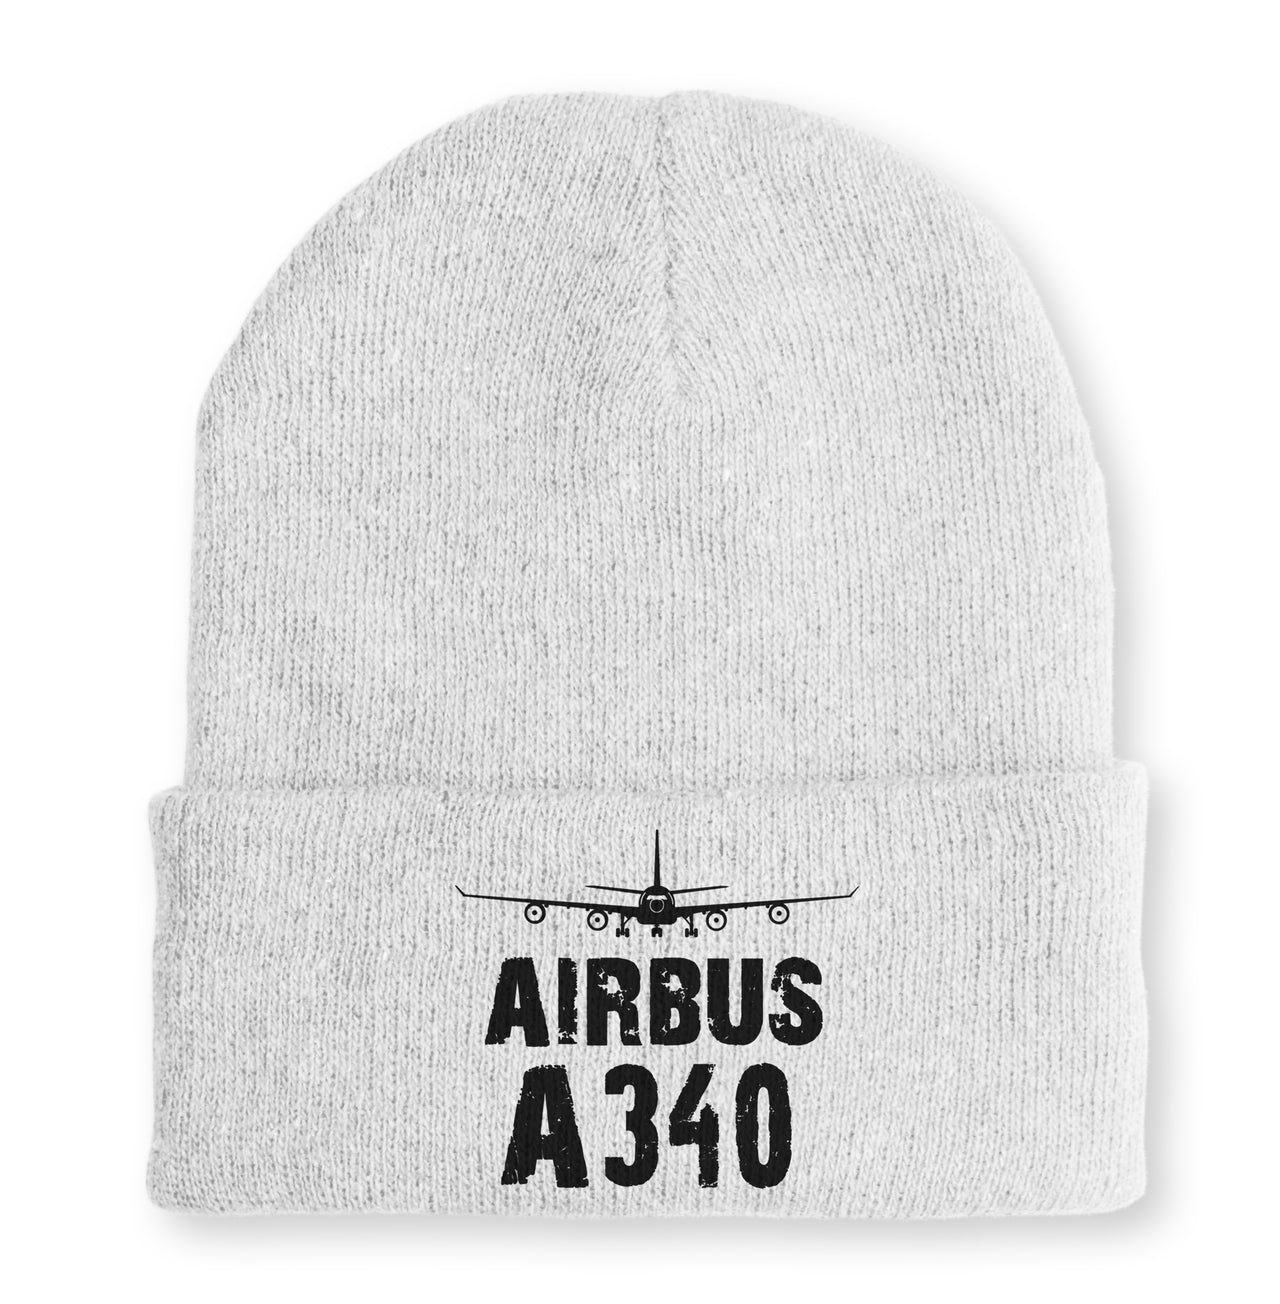 Airbus A340 & Plane Embroidered Beanies